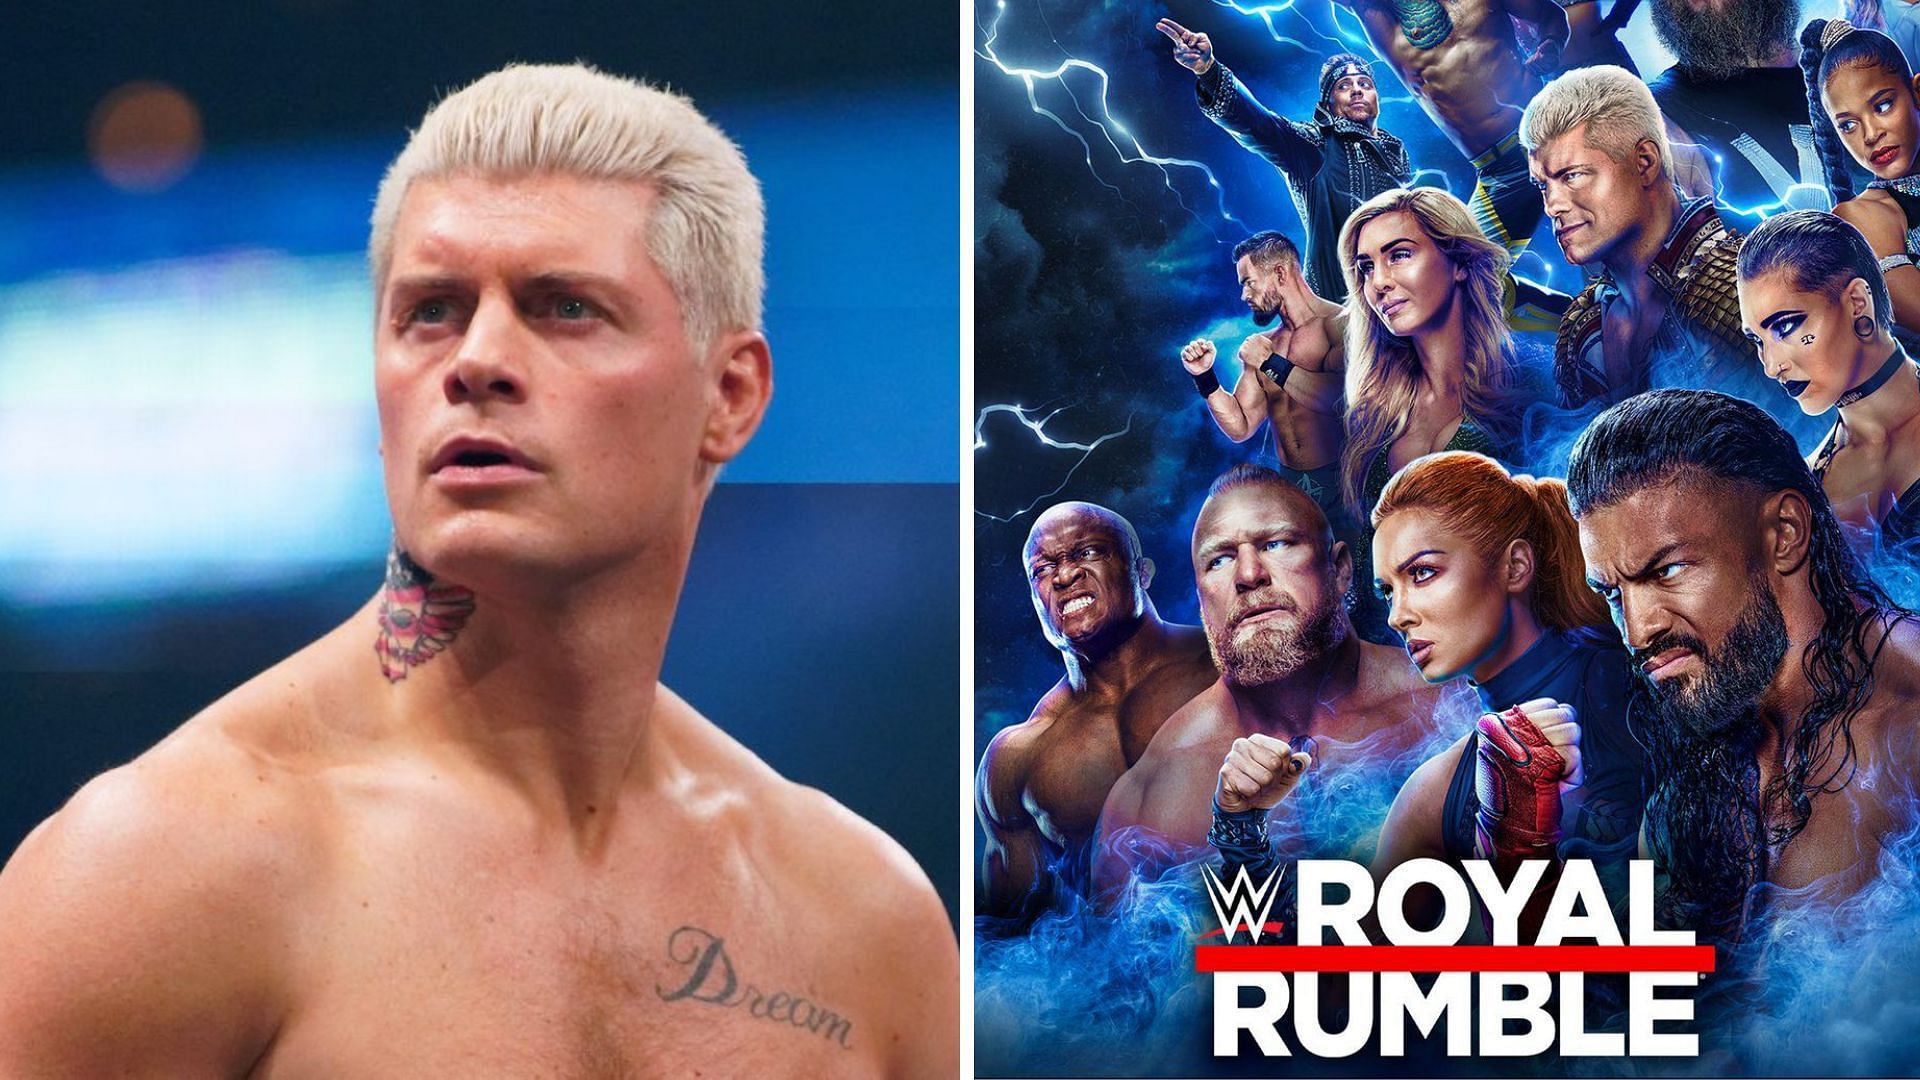 Cody Rhodes will return to action at this year